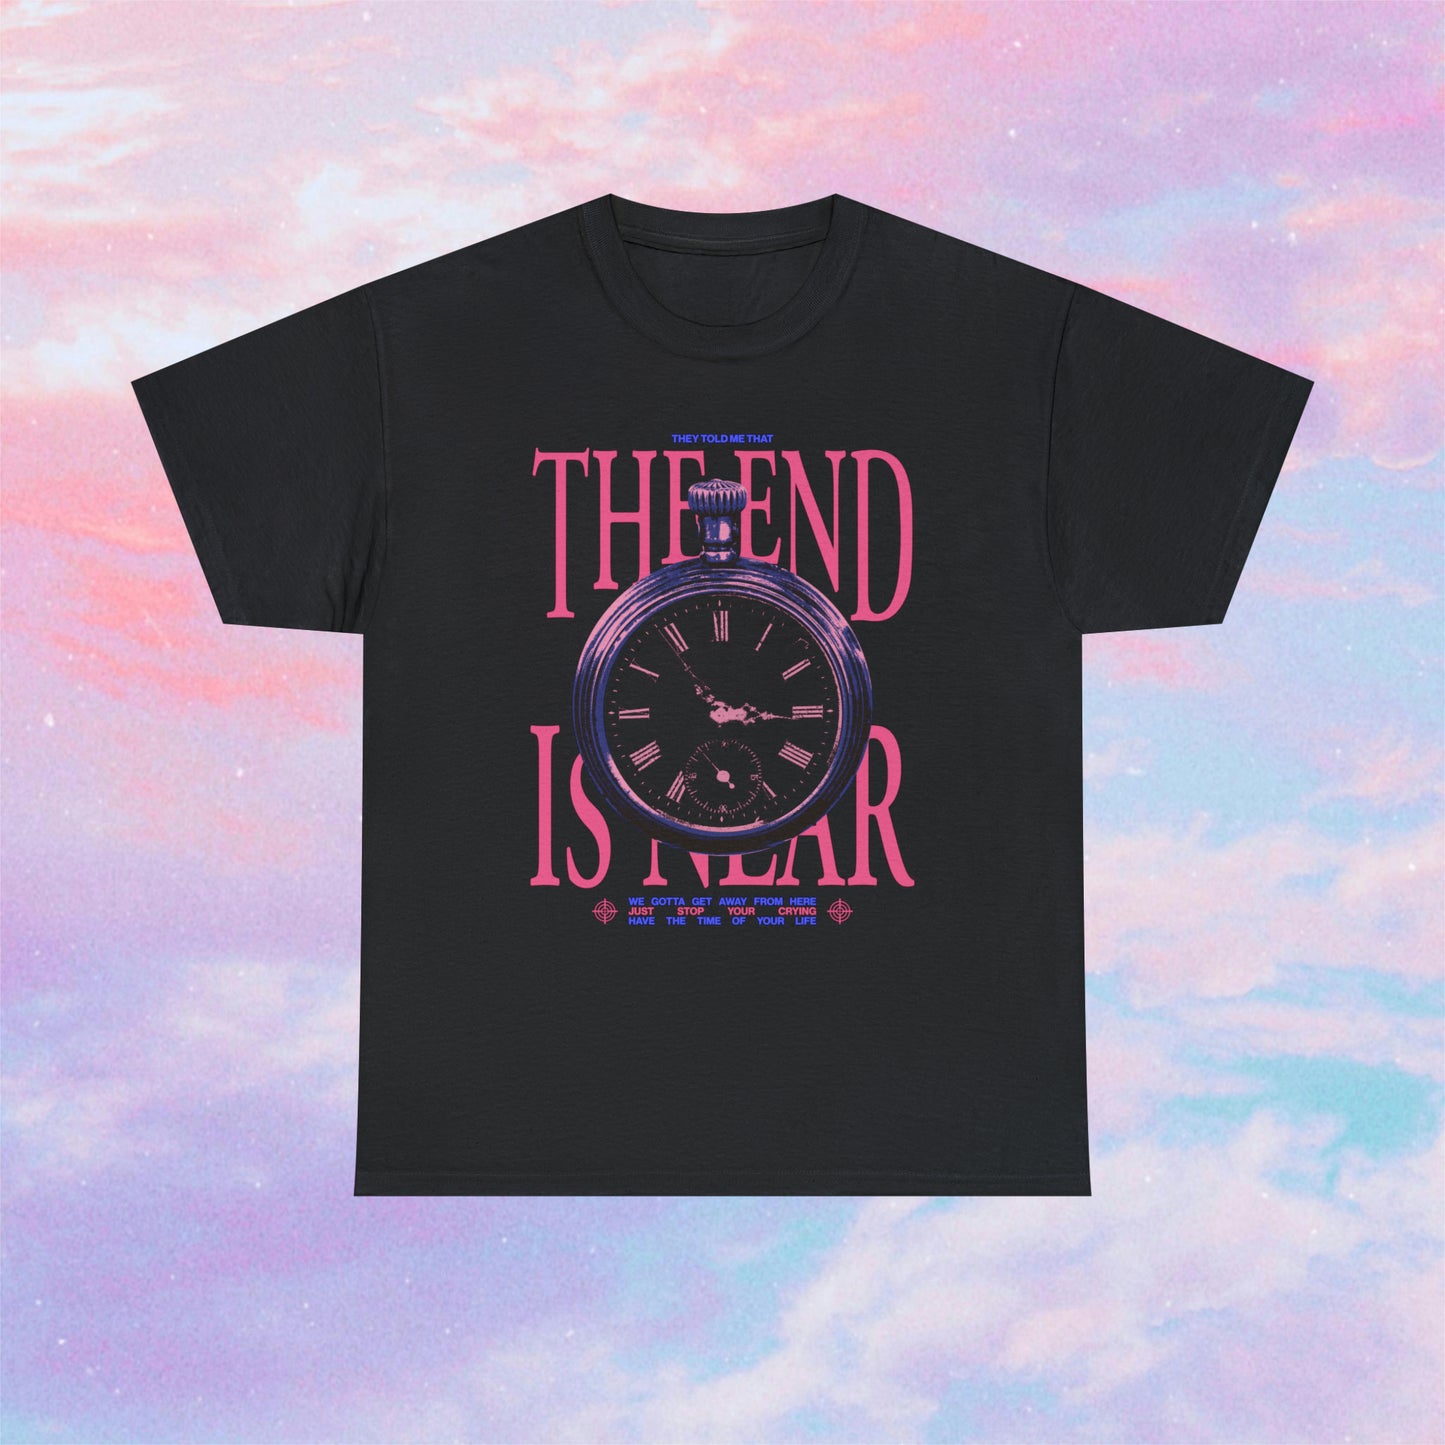 Sign of the Times (The End Is Near) tee